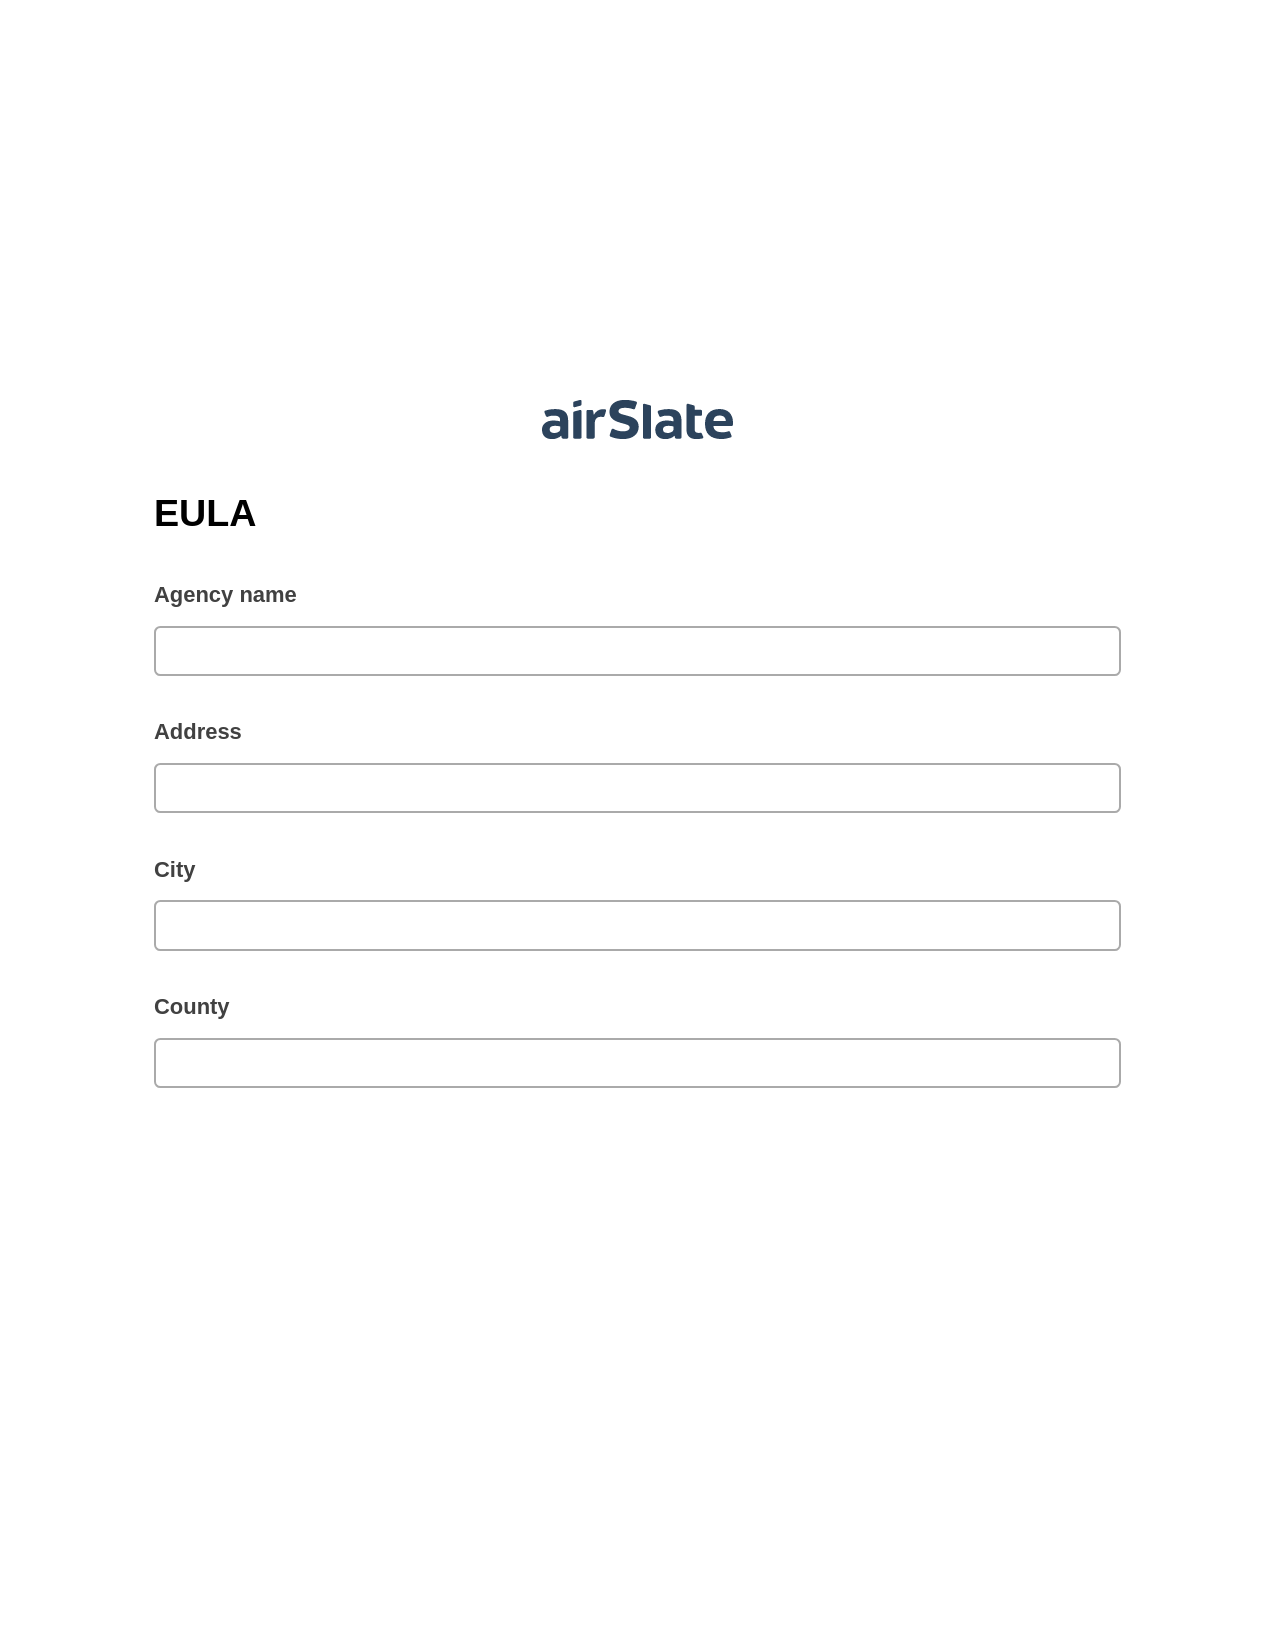 EULA Pre-fill Dropdown from Airtable, Invoke Salesforce Process Bot, Export to MySQL Bot